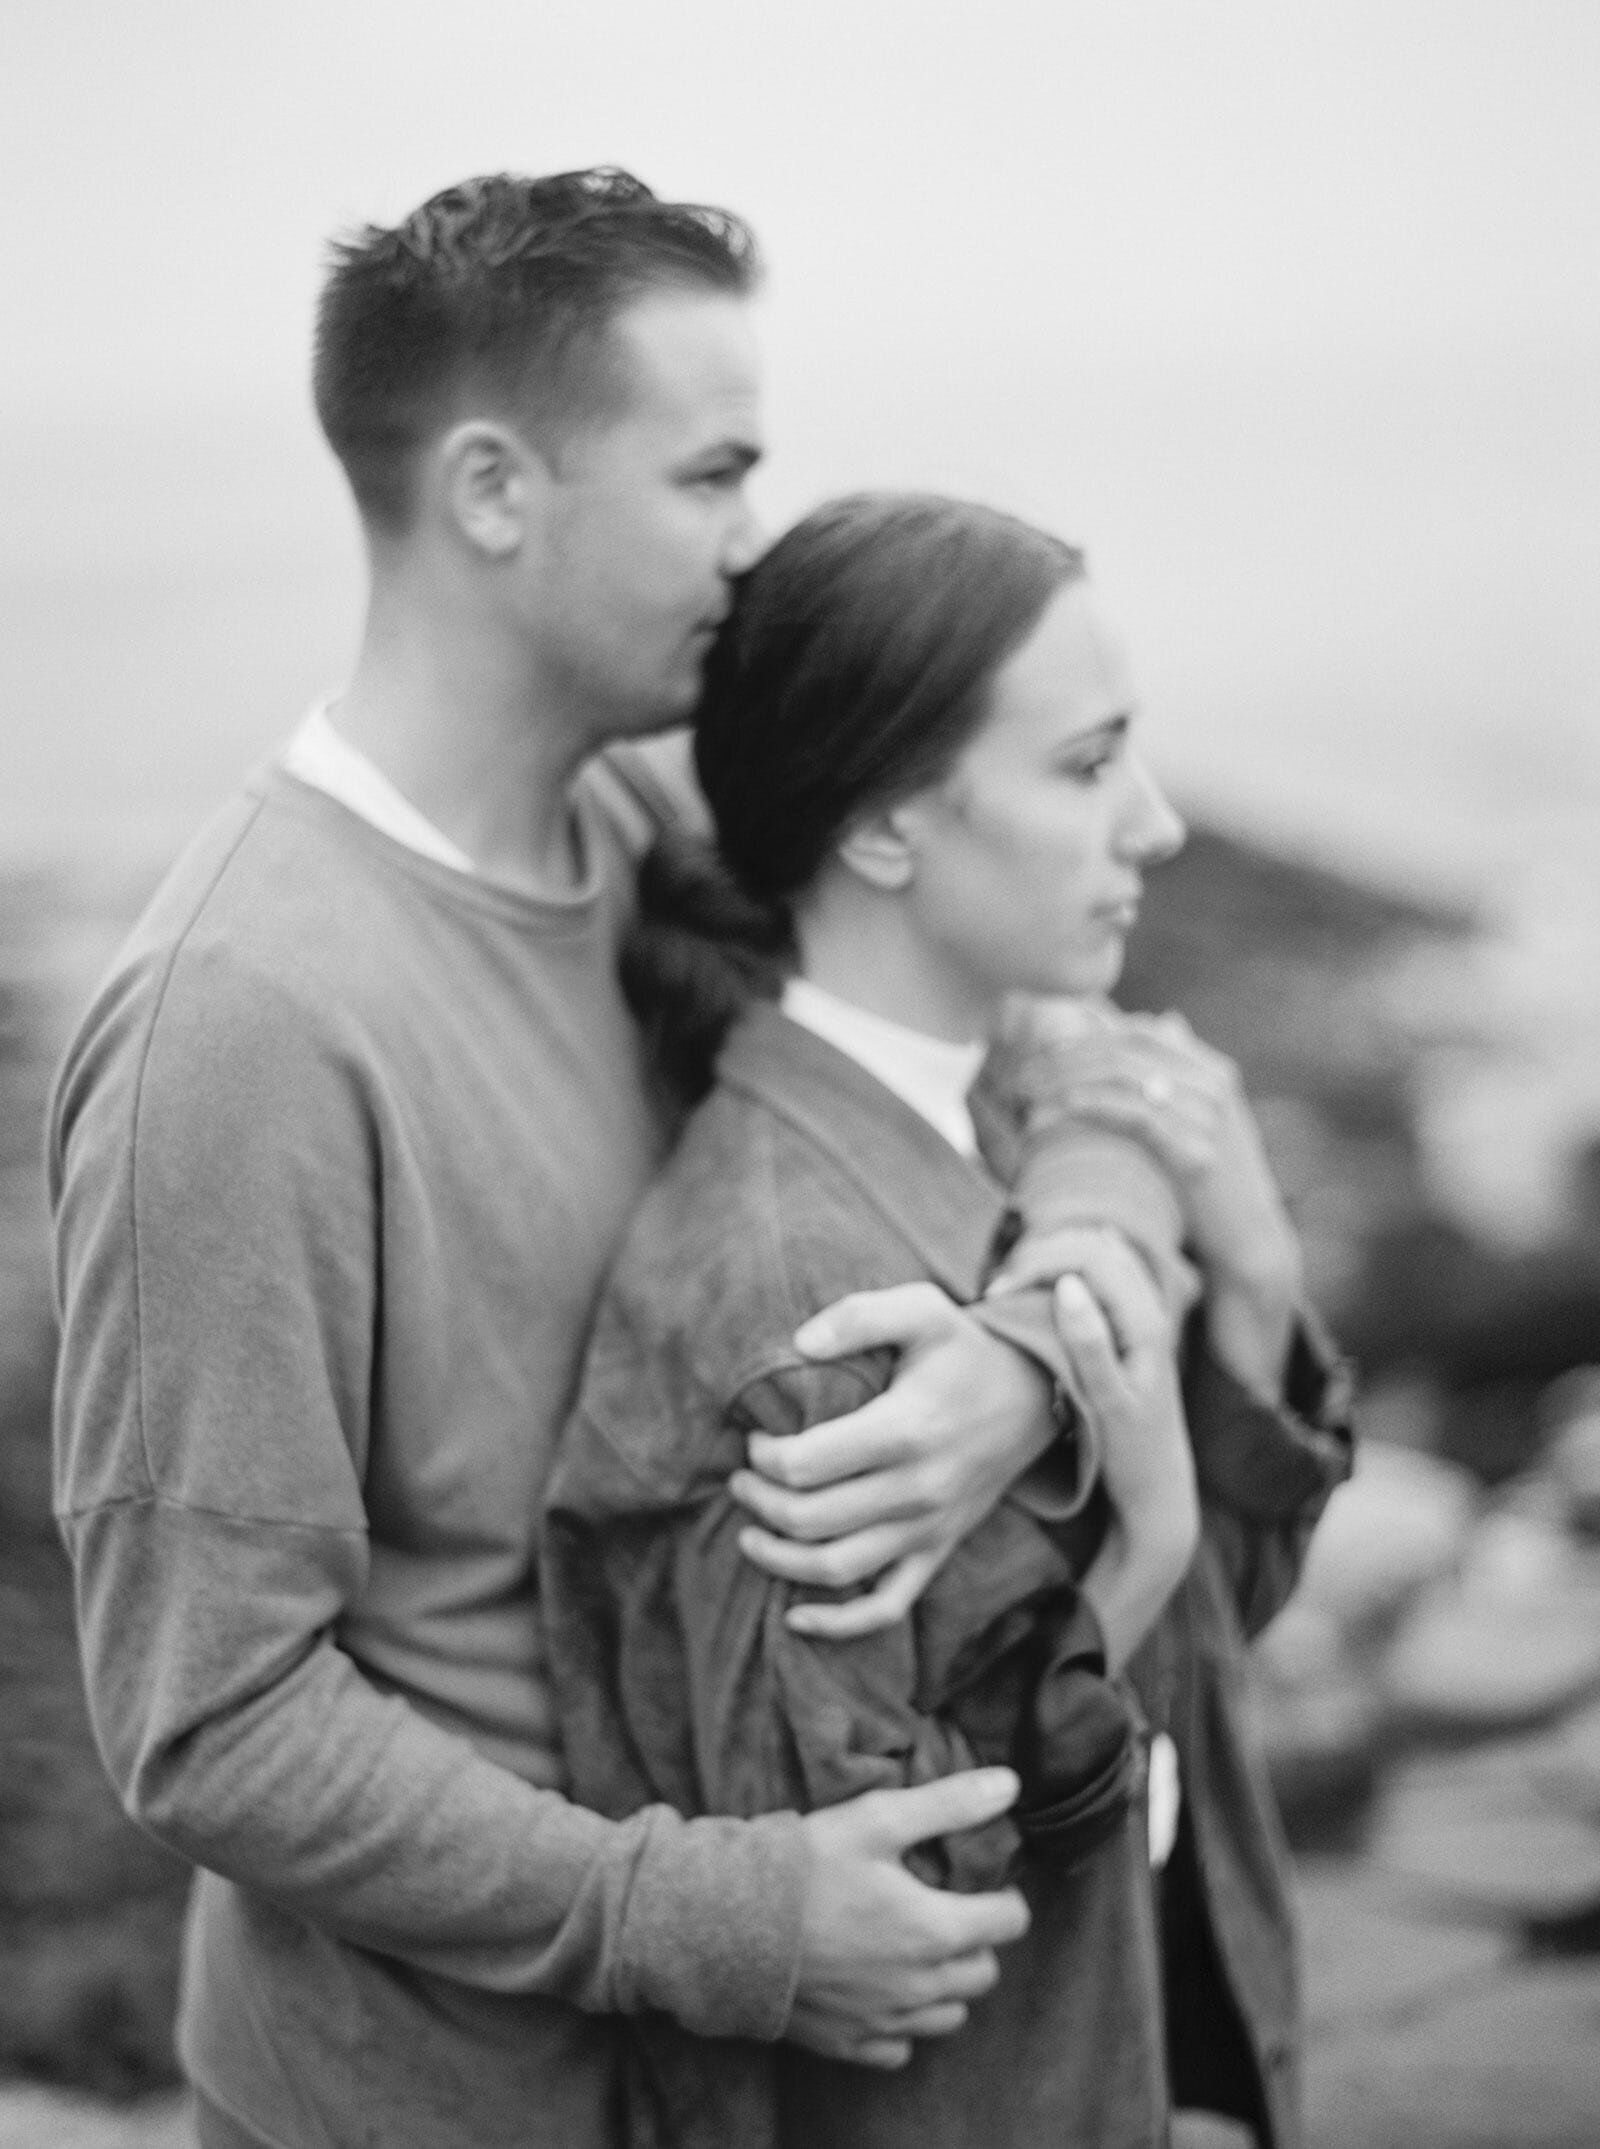 Giants-Causeway-Engagement-session-Krmorenophoto-22